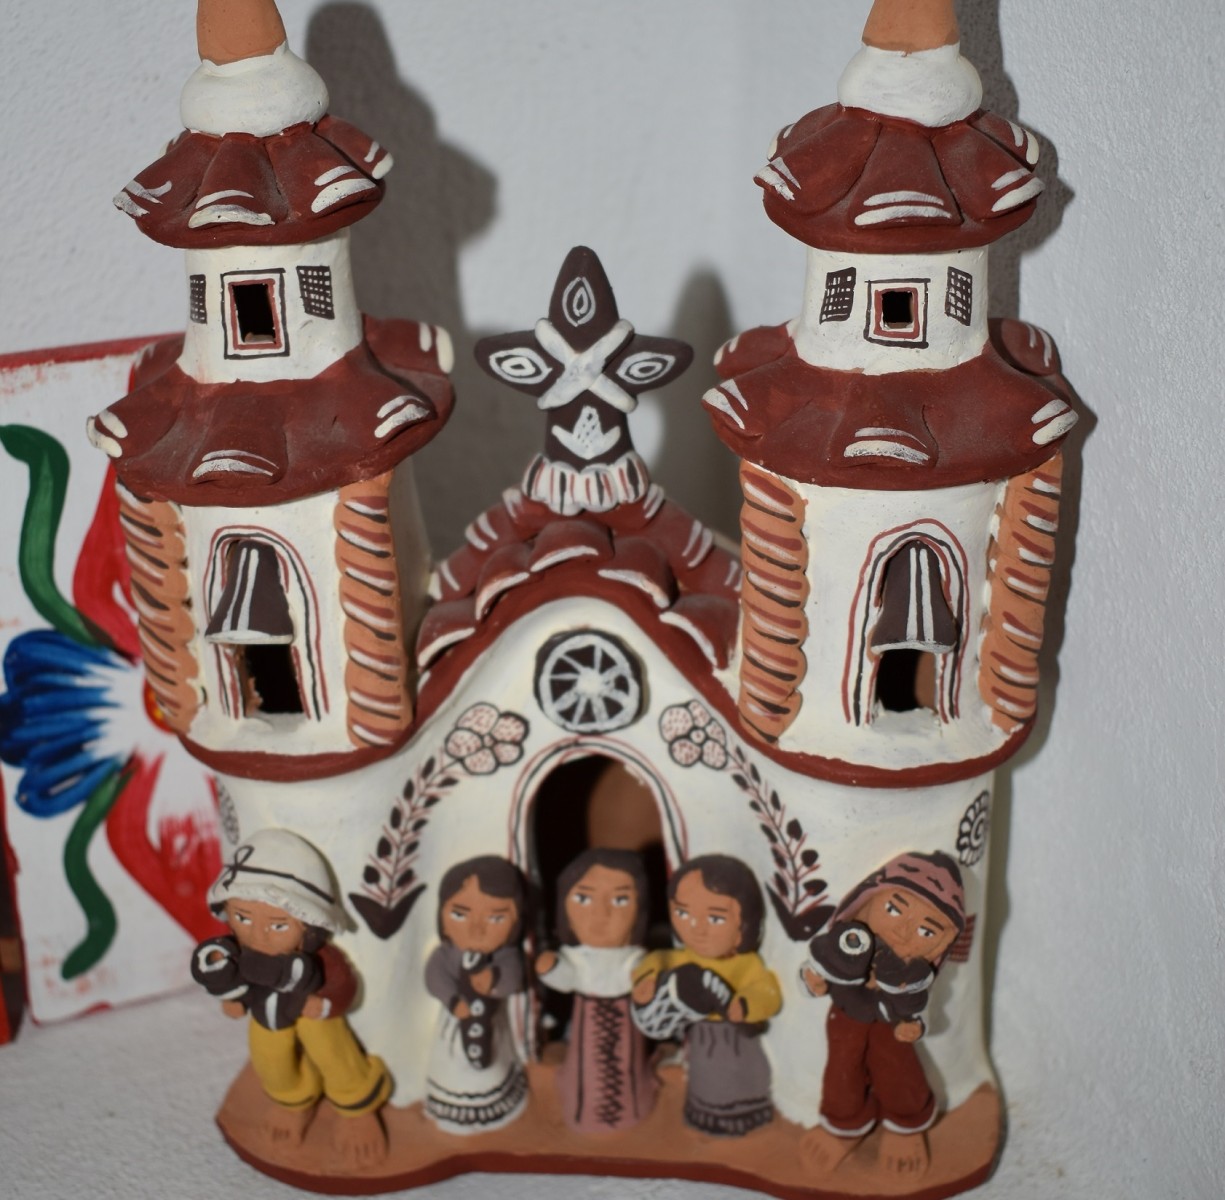 Artist Unknown. Church. Peru. Painted Clay. Collection, Taylor-Mesilla Historic Property.